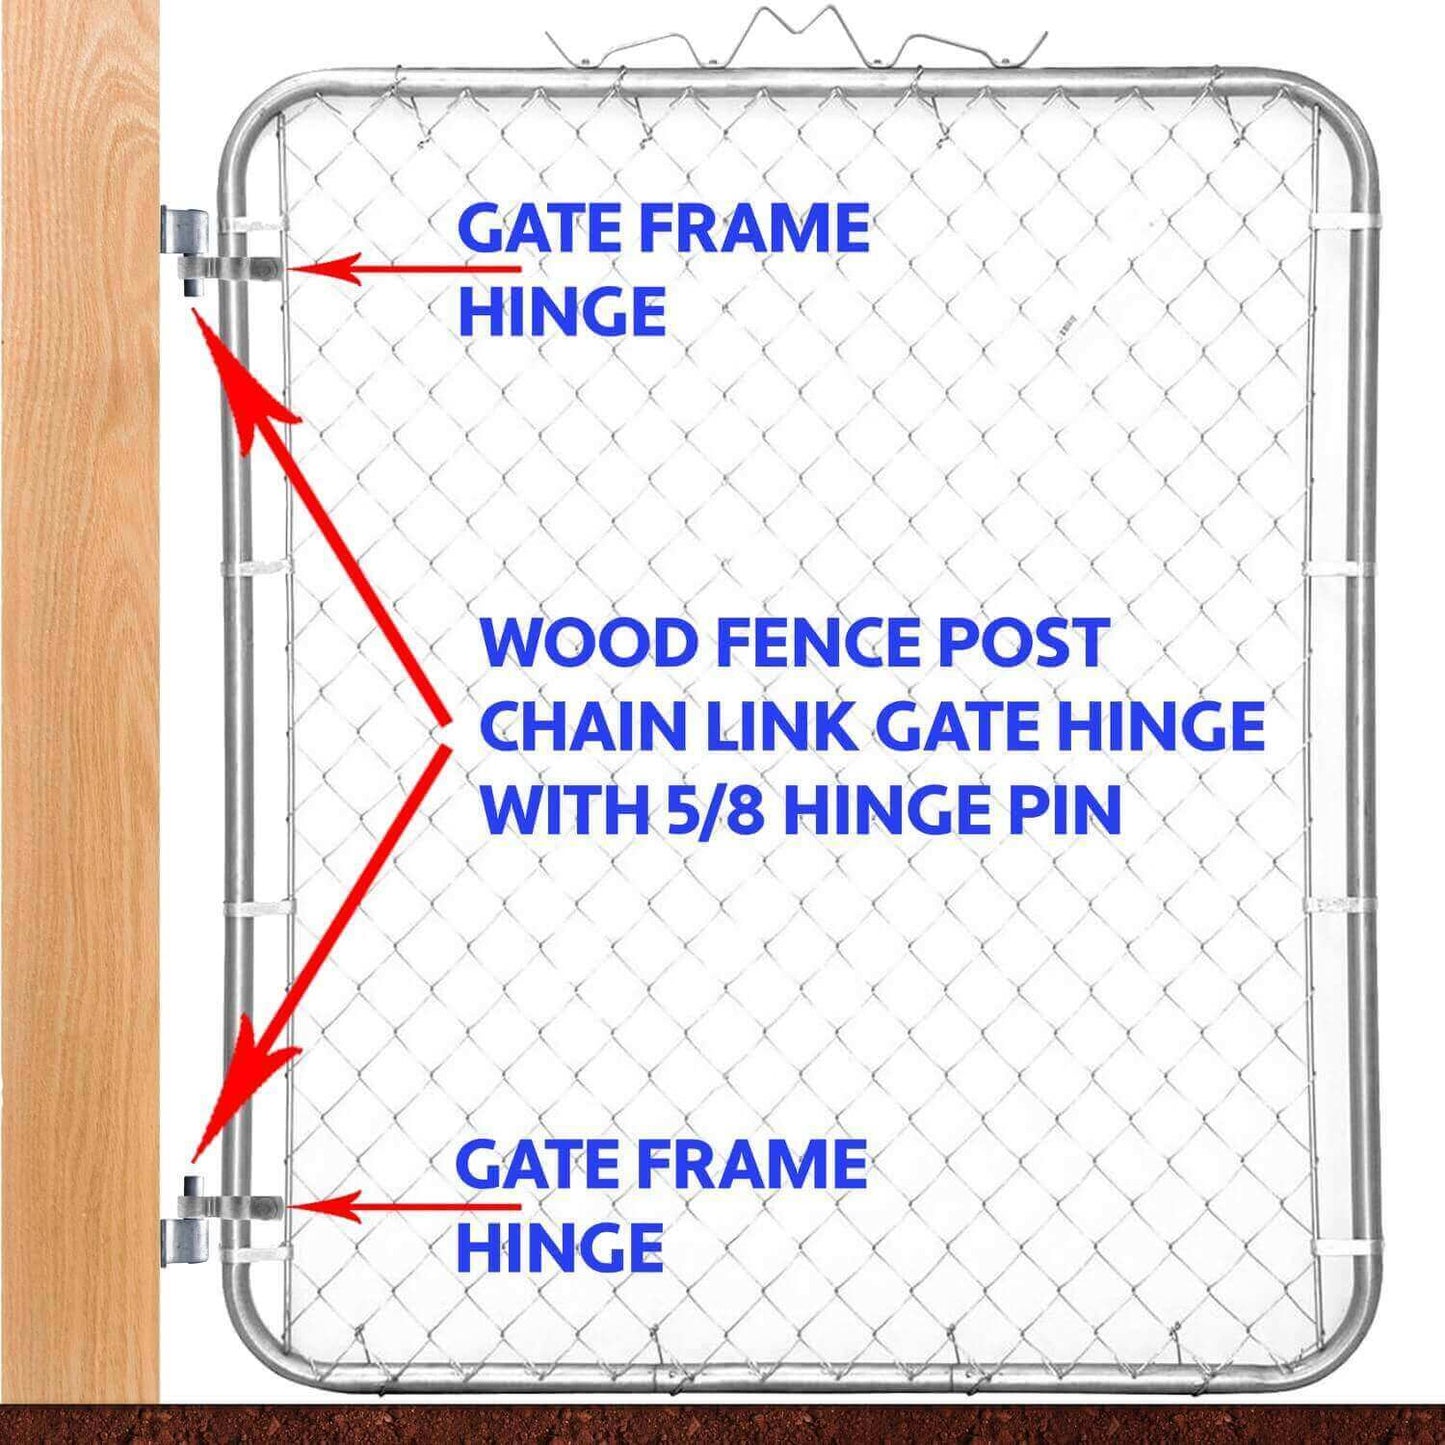 Wood Fence Post Chain Link Gate Hinge With 5/8 Hinge Pin. Constructed of Heavy Duty Galvanized Steel. Horizontal Mount. (2 Pack)